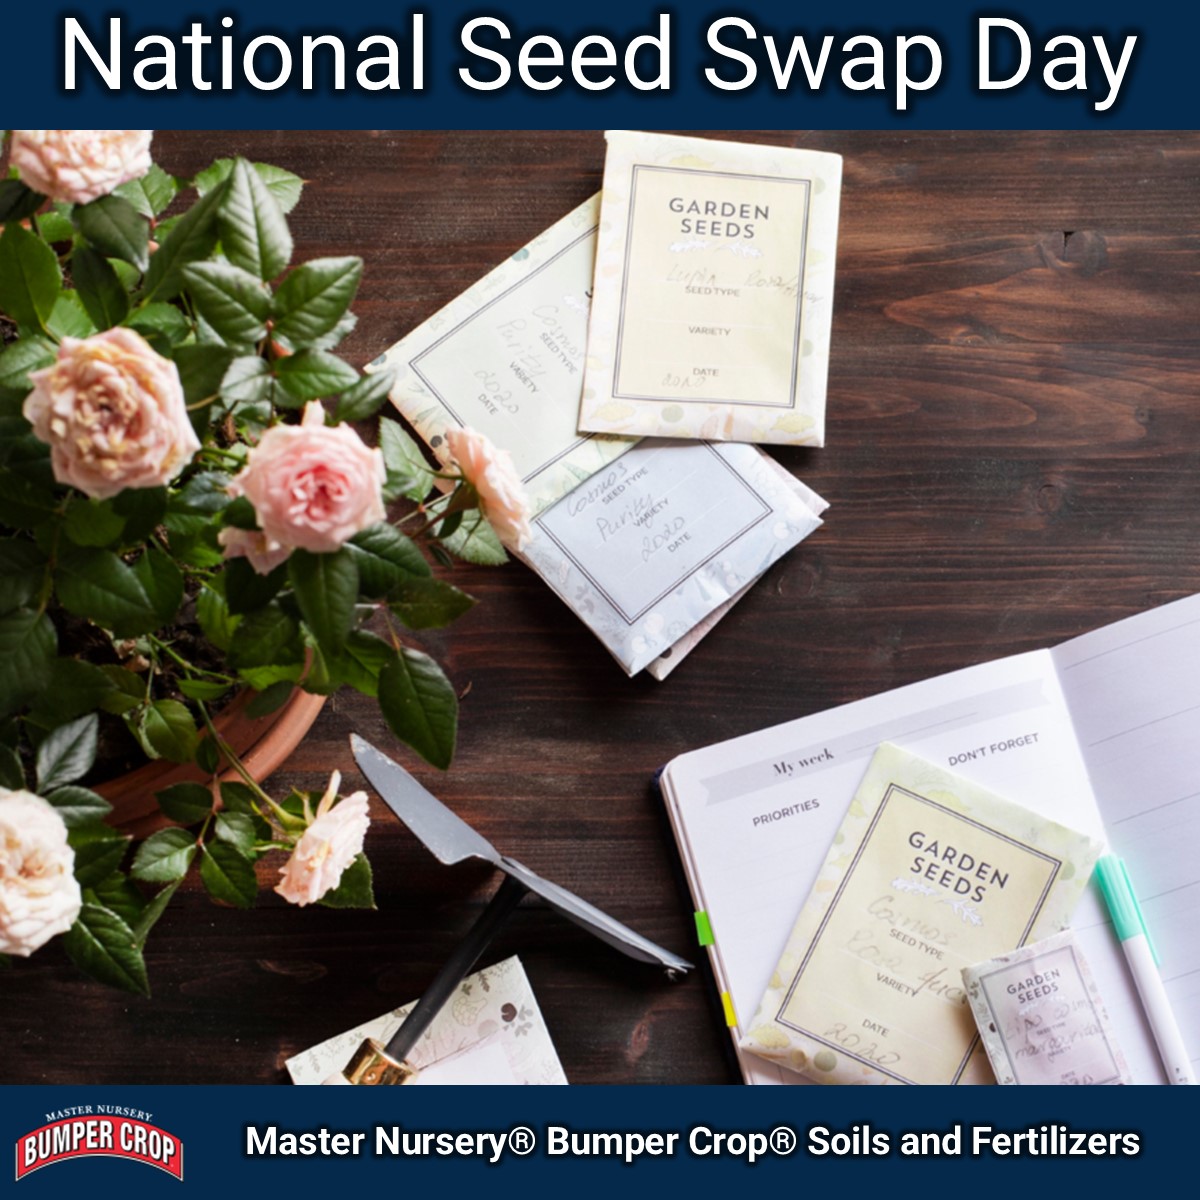 Happy National Seed Swap Day! Spring is right around the corner. Be sure to visit your local Master Nursery Garden Center for Bumper Crop® Soils and Fertilizers to ensure your seedlings get off to a great start! #SeedSwap #NationalSeedSwapDay #Seeds bumpercrop.com/store-locator/